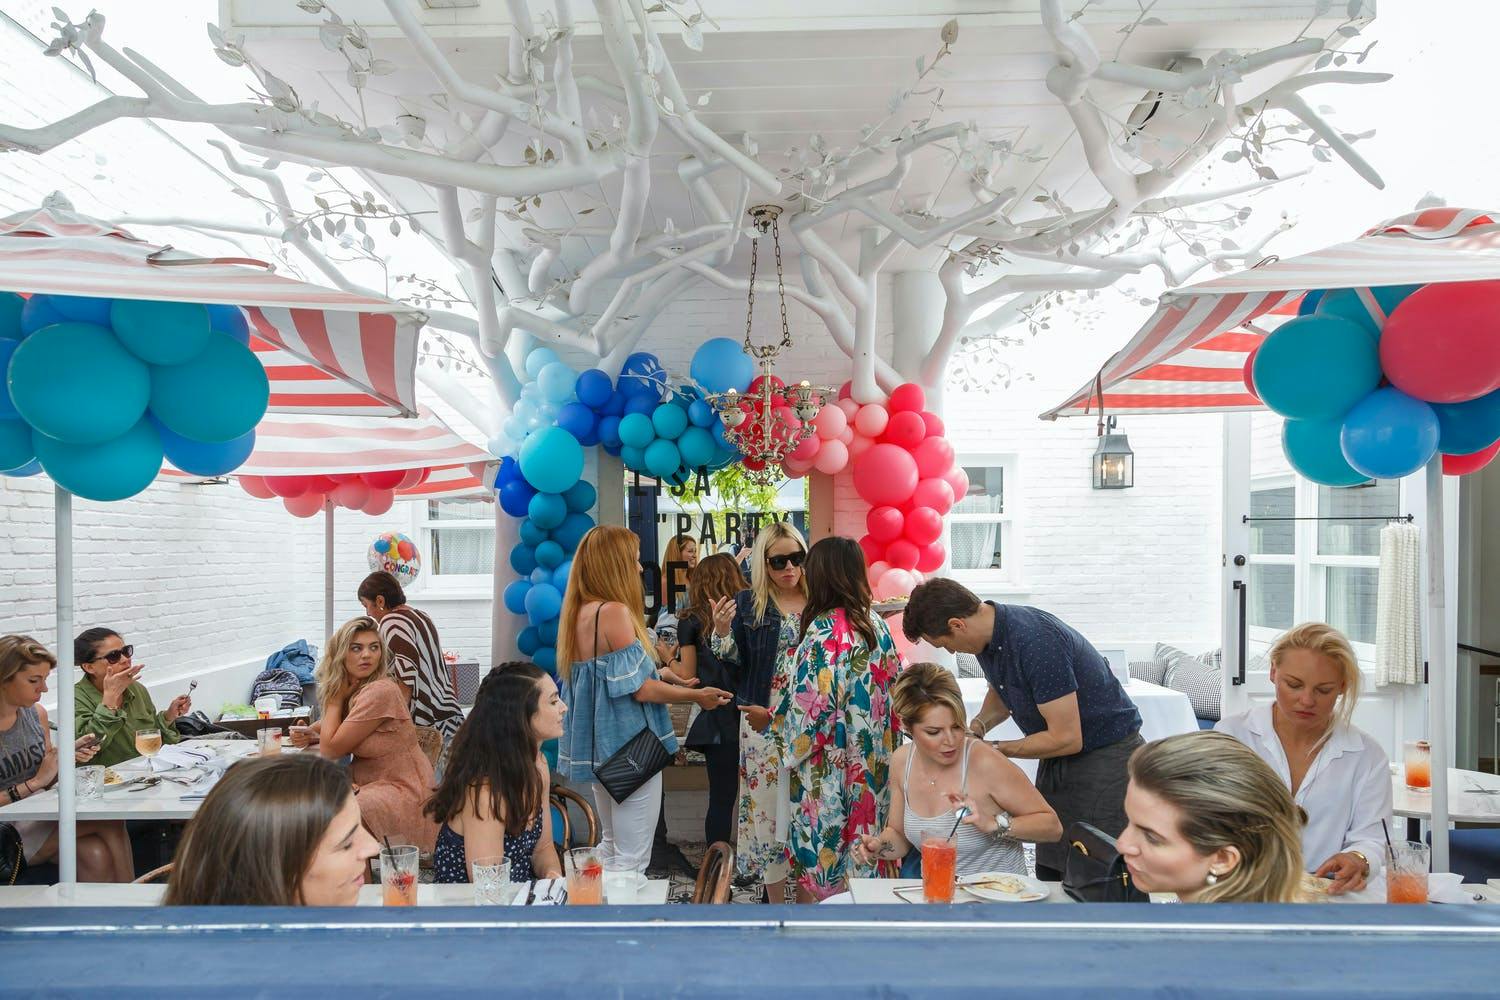 Outdoor Baby Shower With Blue and Red Balloon Décor | PartySlate